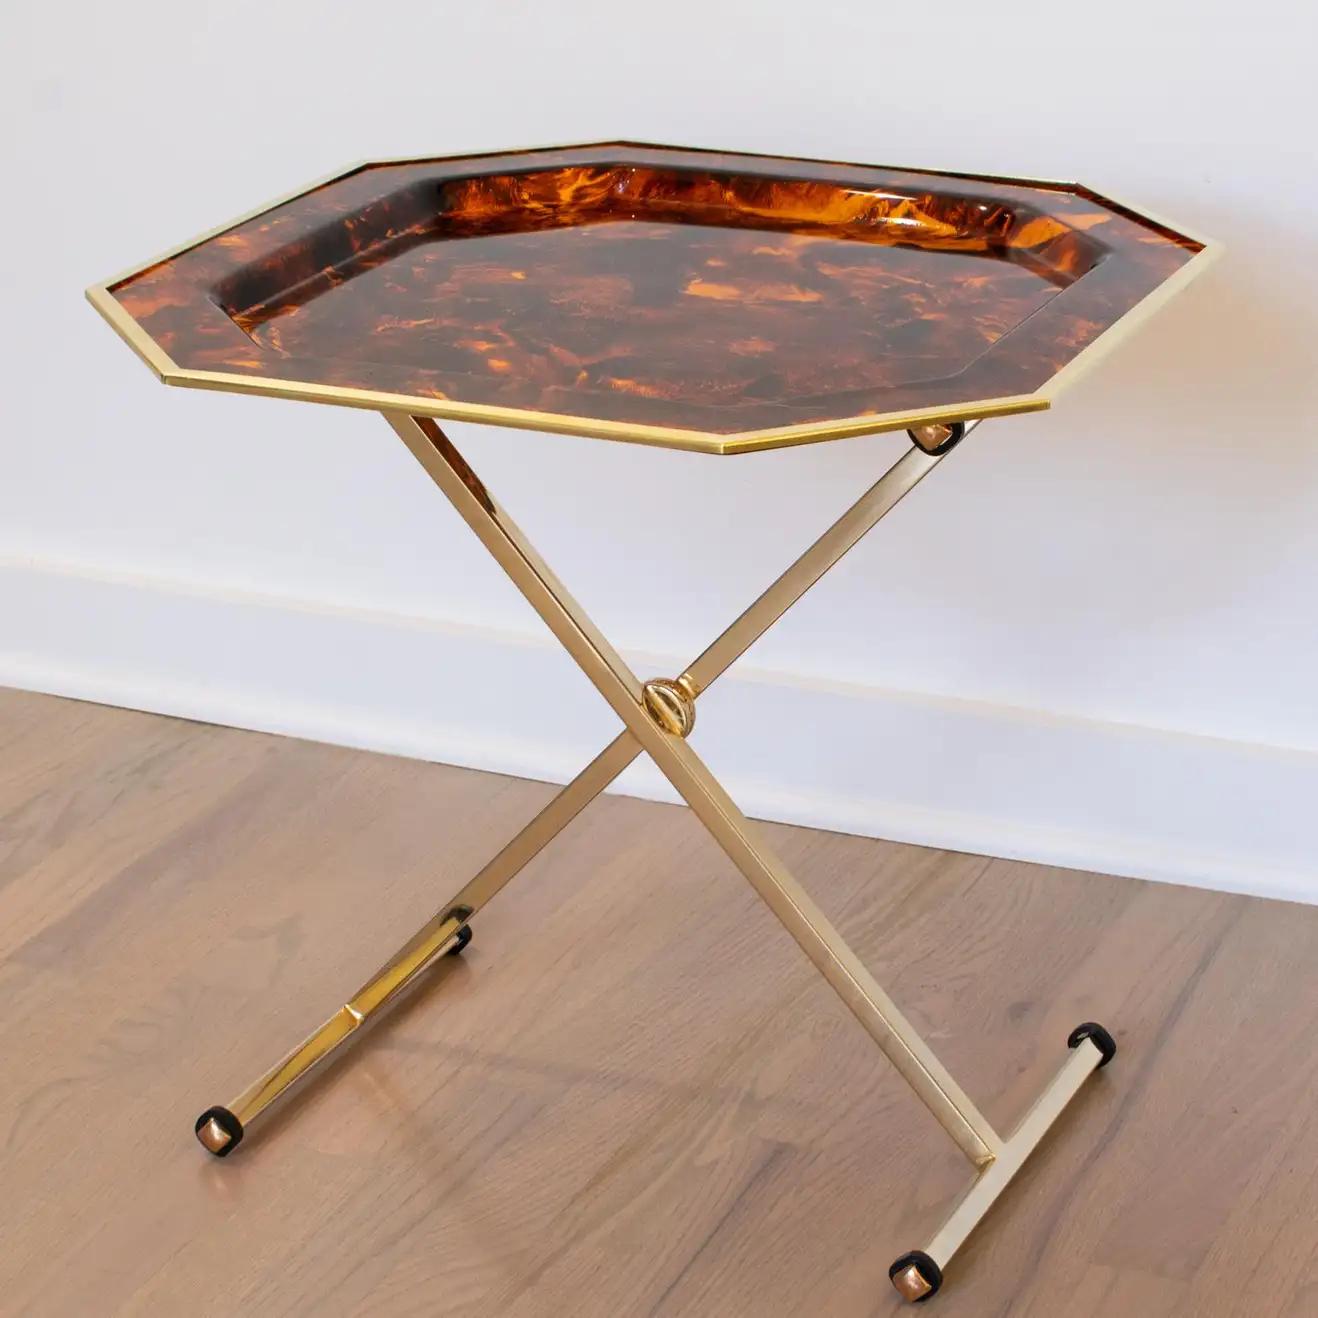 Maison Mercier, Paris, designed and crafted this elegant Mid-Century-Modern barware folding tray table in the 1960s. The large-scale square butler tray is made of Lucite with a faux tortoiseshell (tortoise) textured pattern and gilded brass trim.